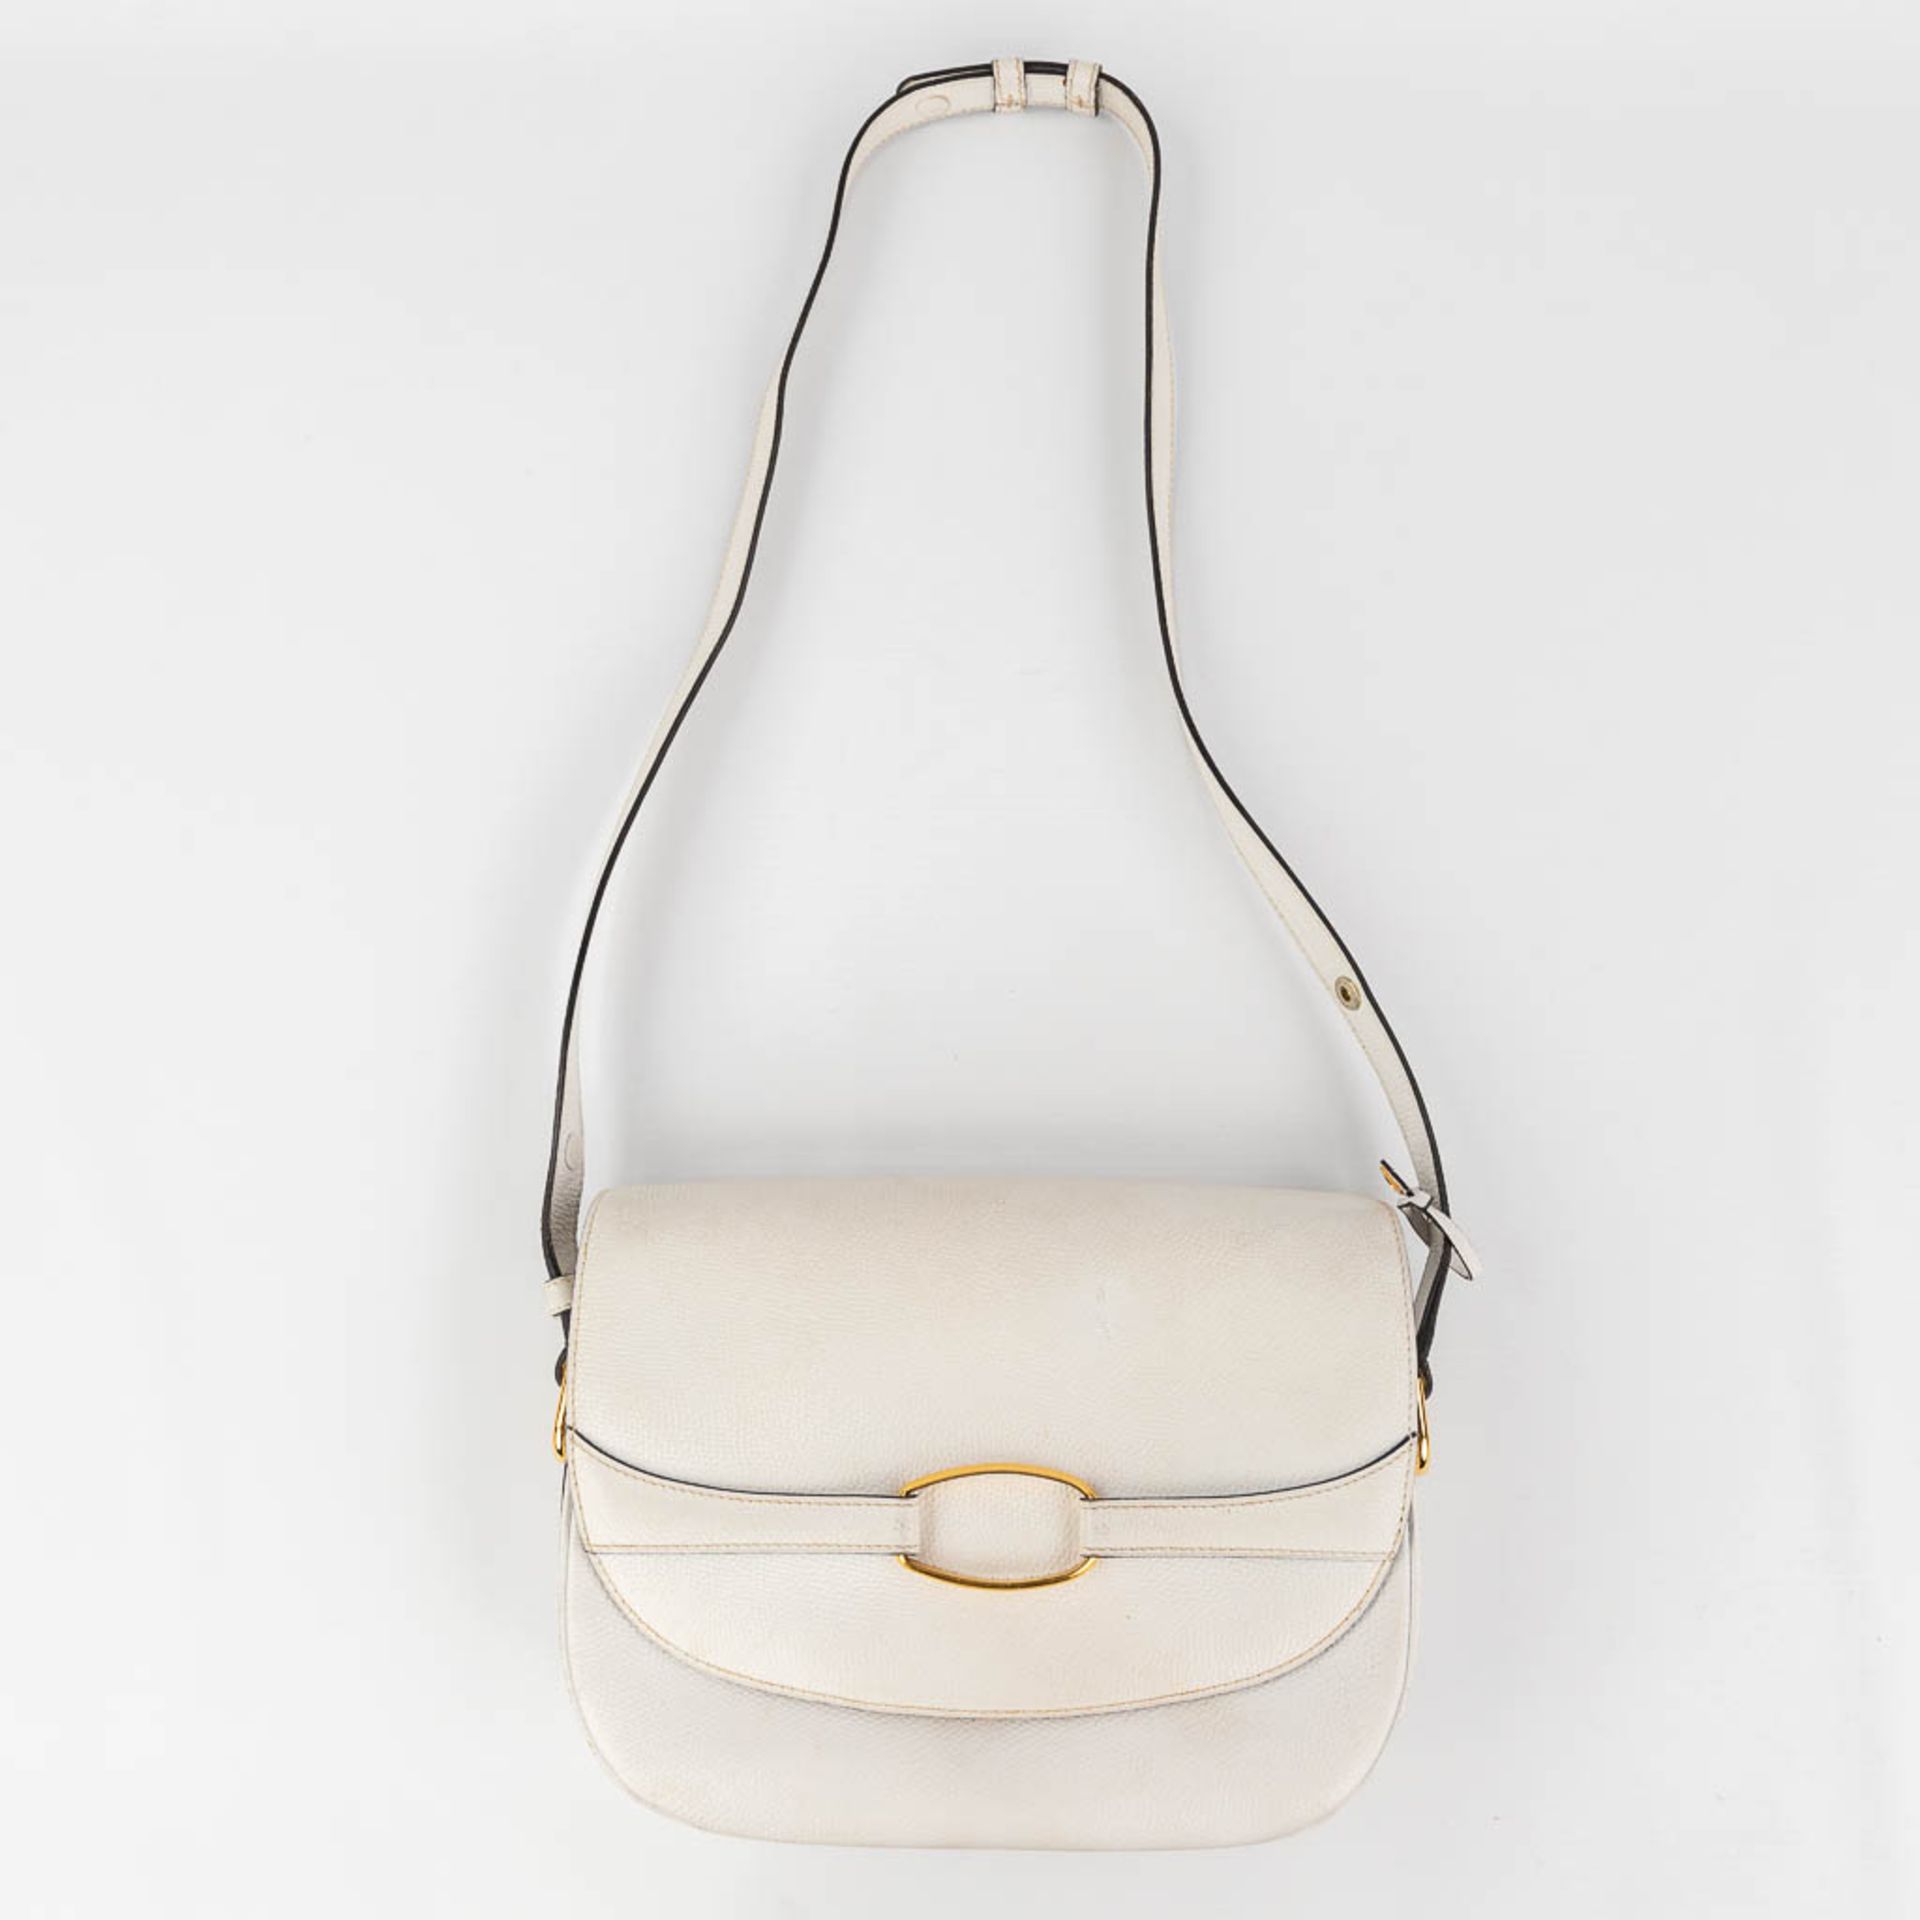 Delvaux, a handbag made of white leather with gold-plated elements. (W: 26 x H: 19 cm) - Bild 12 aus 19